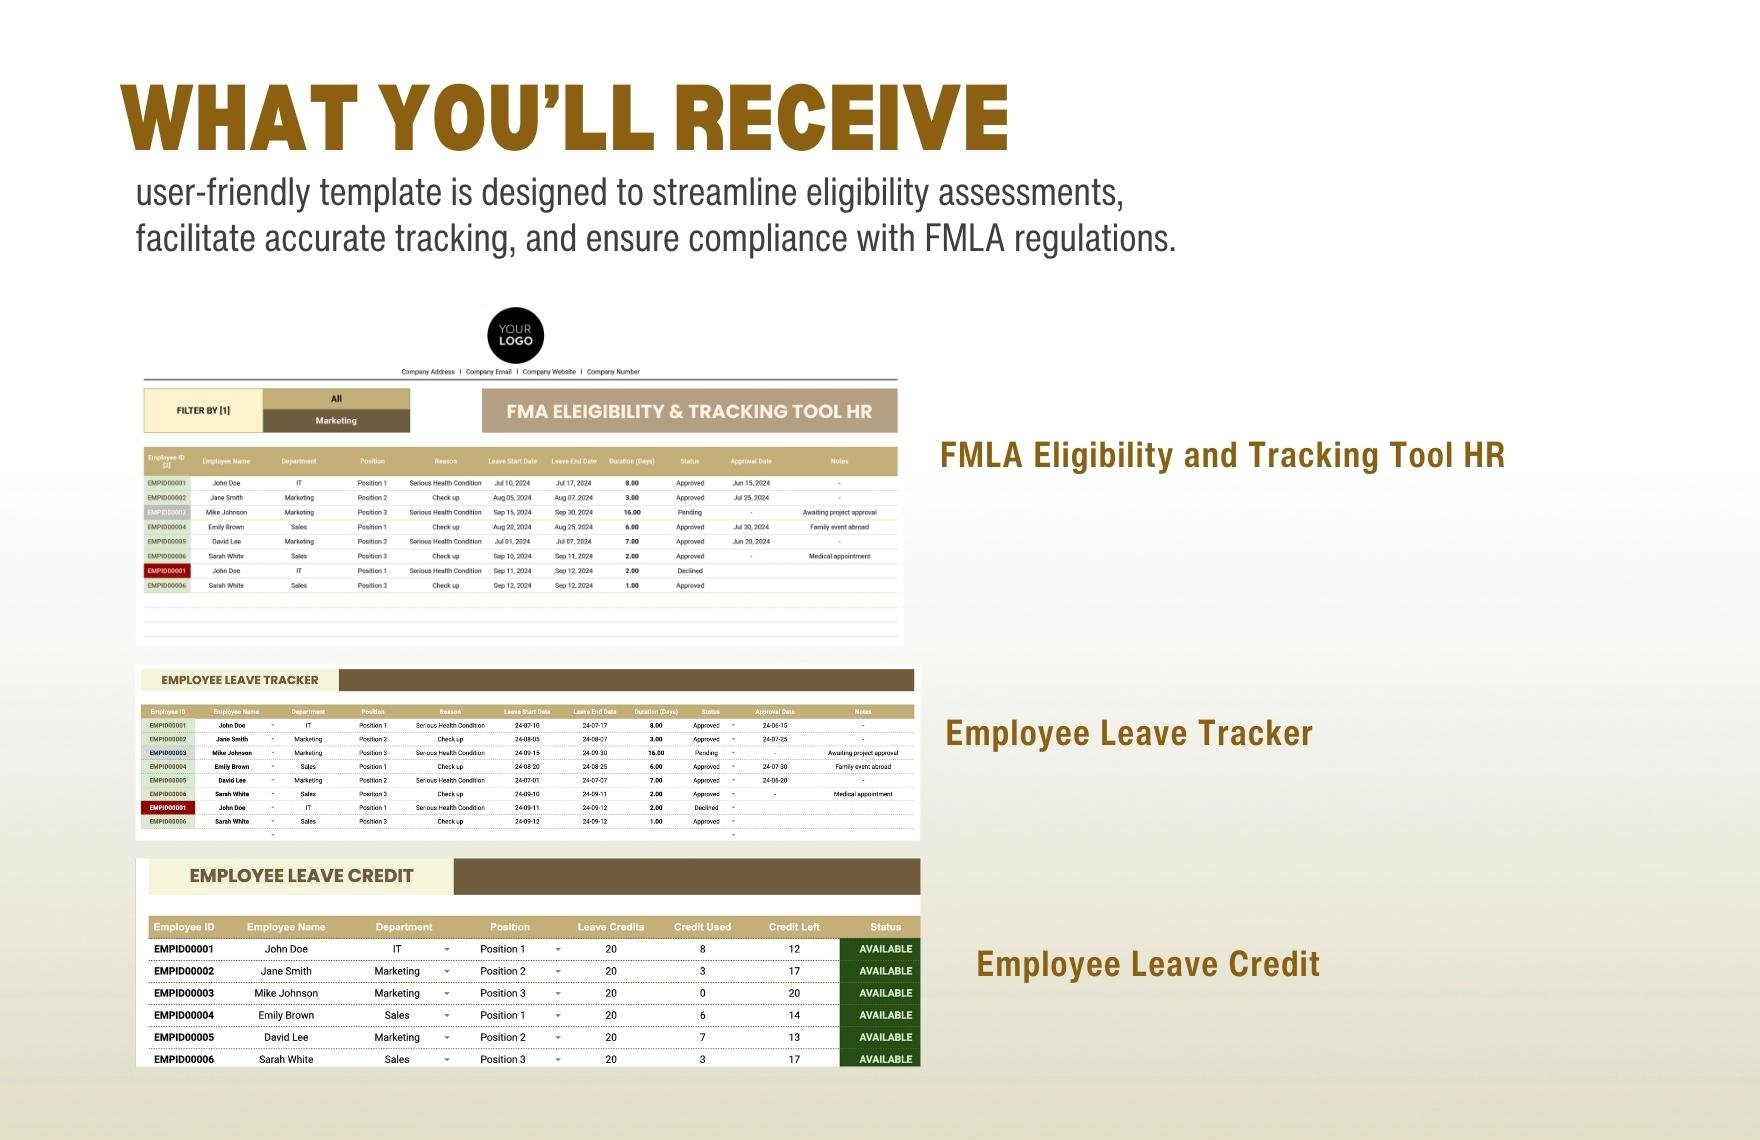 FMLA Eligibility and Tracking Tool HR Template